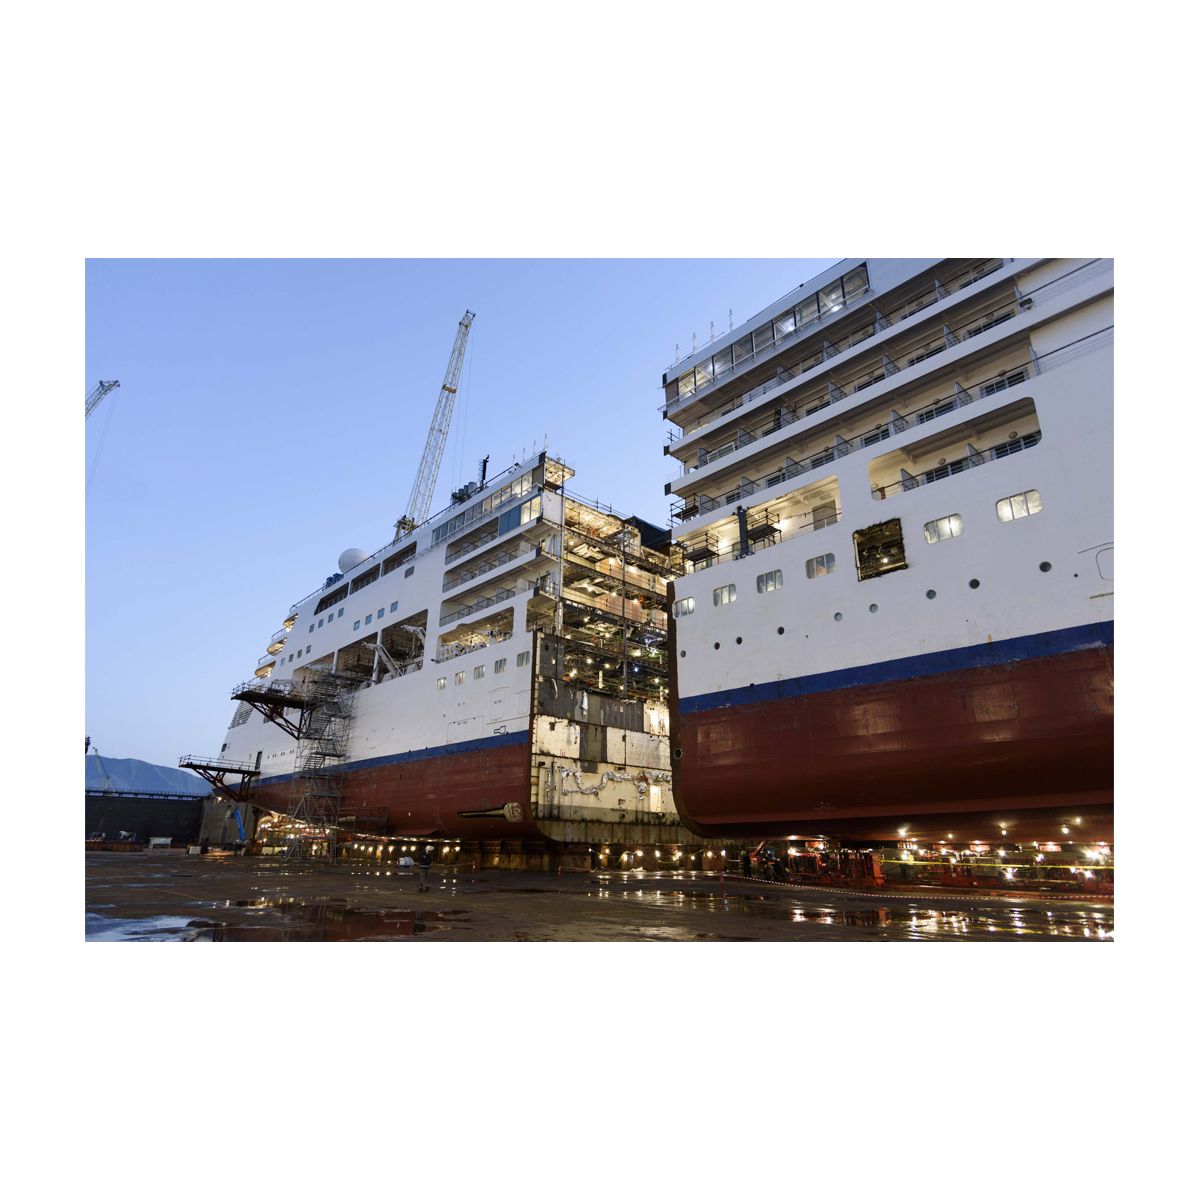 CUT IN TWO: THE LENGTHENING PROCESS OF SILVERSEA’S SILVER SPIRIT BEGINS